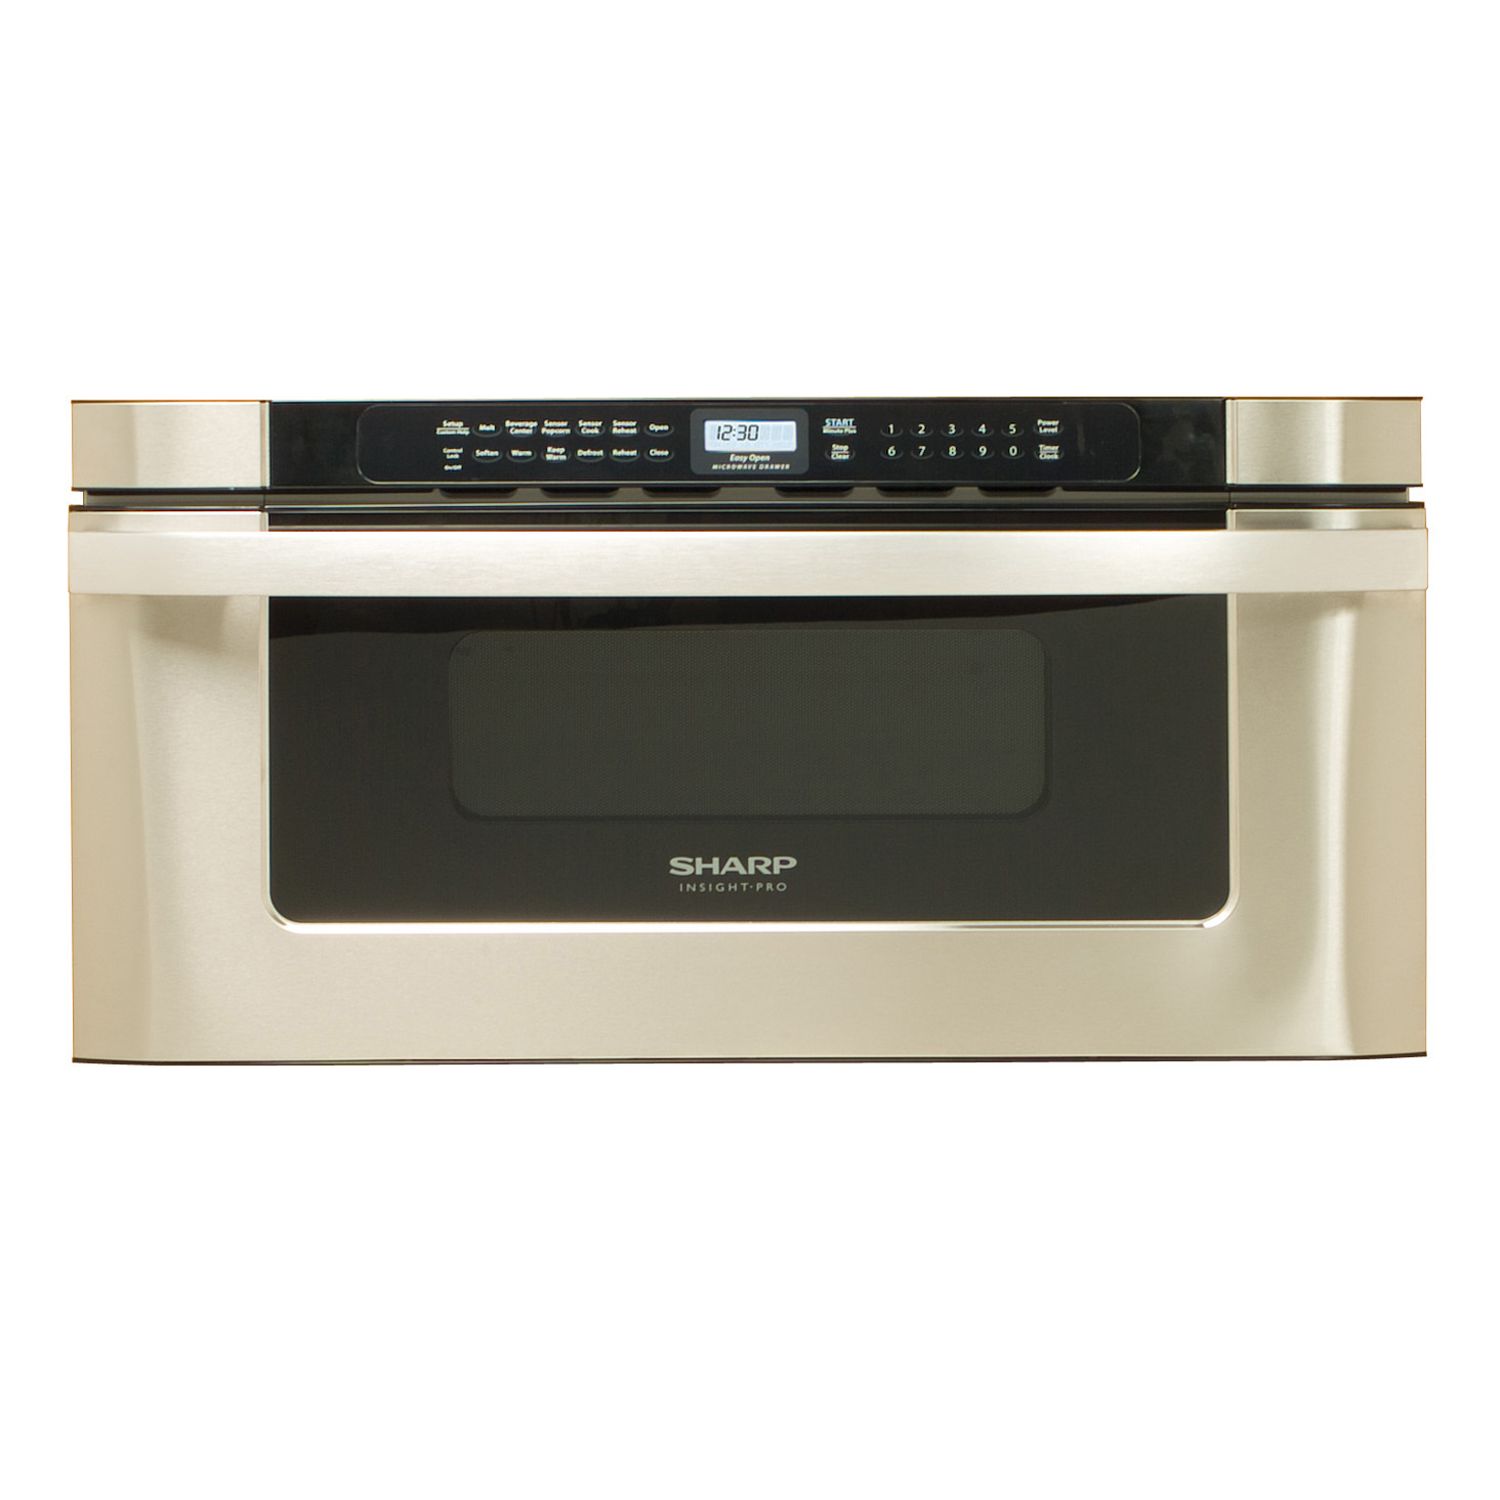 Sharp 30 1.2 cu. ft. Microwave Drawer Oven - Stainless Steel